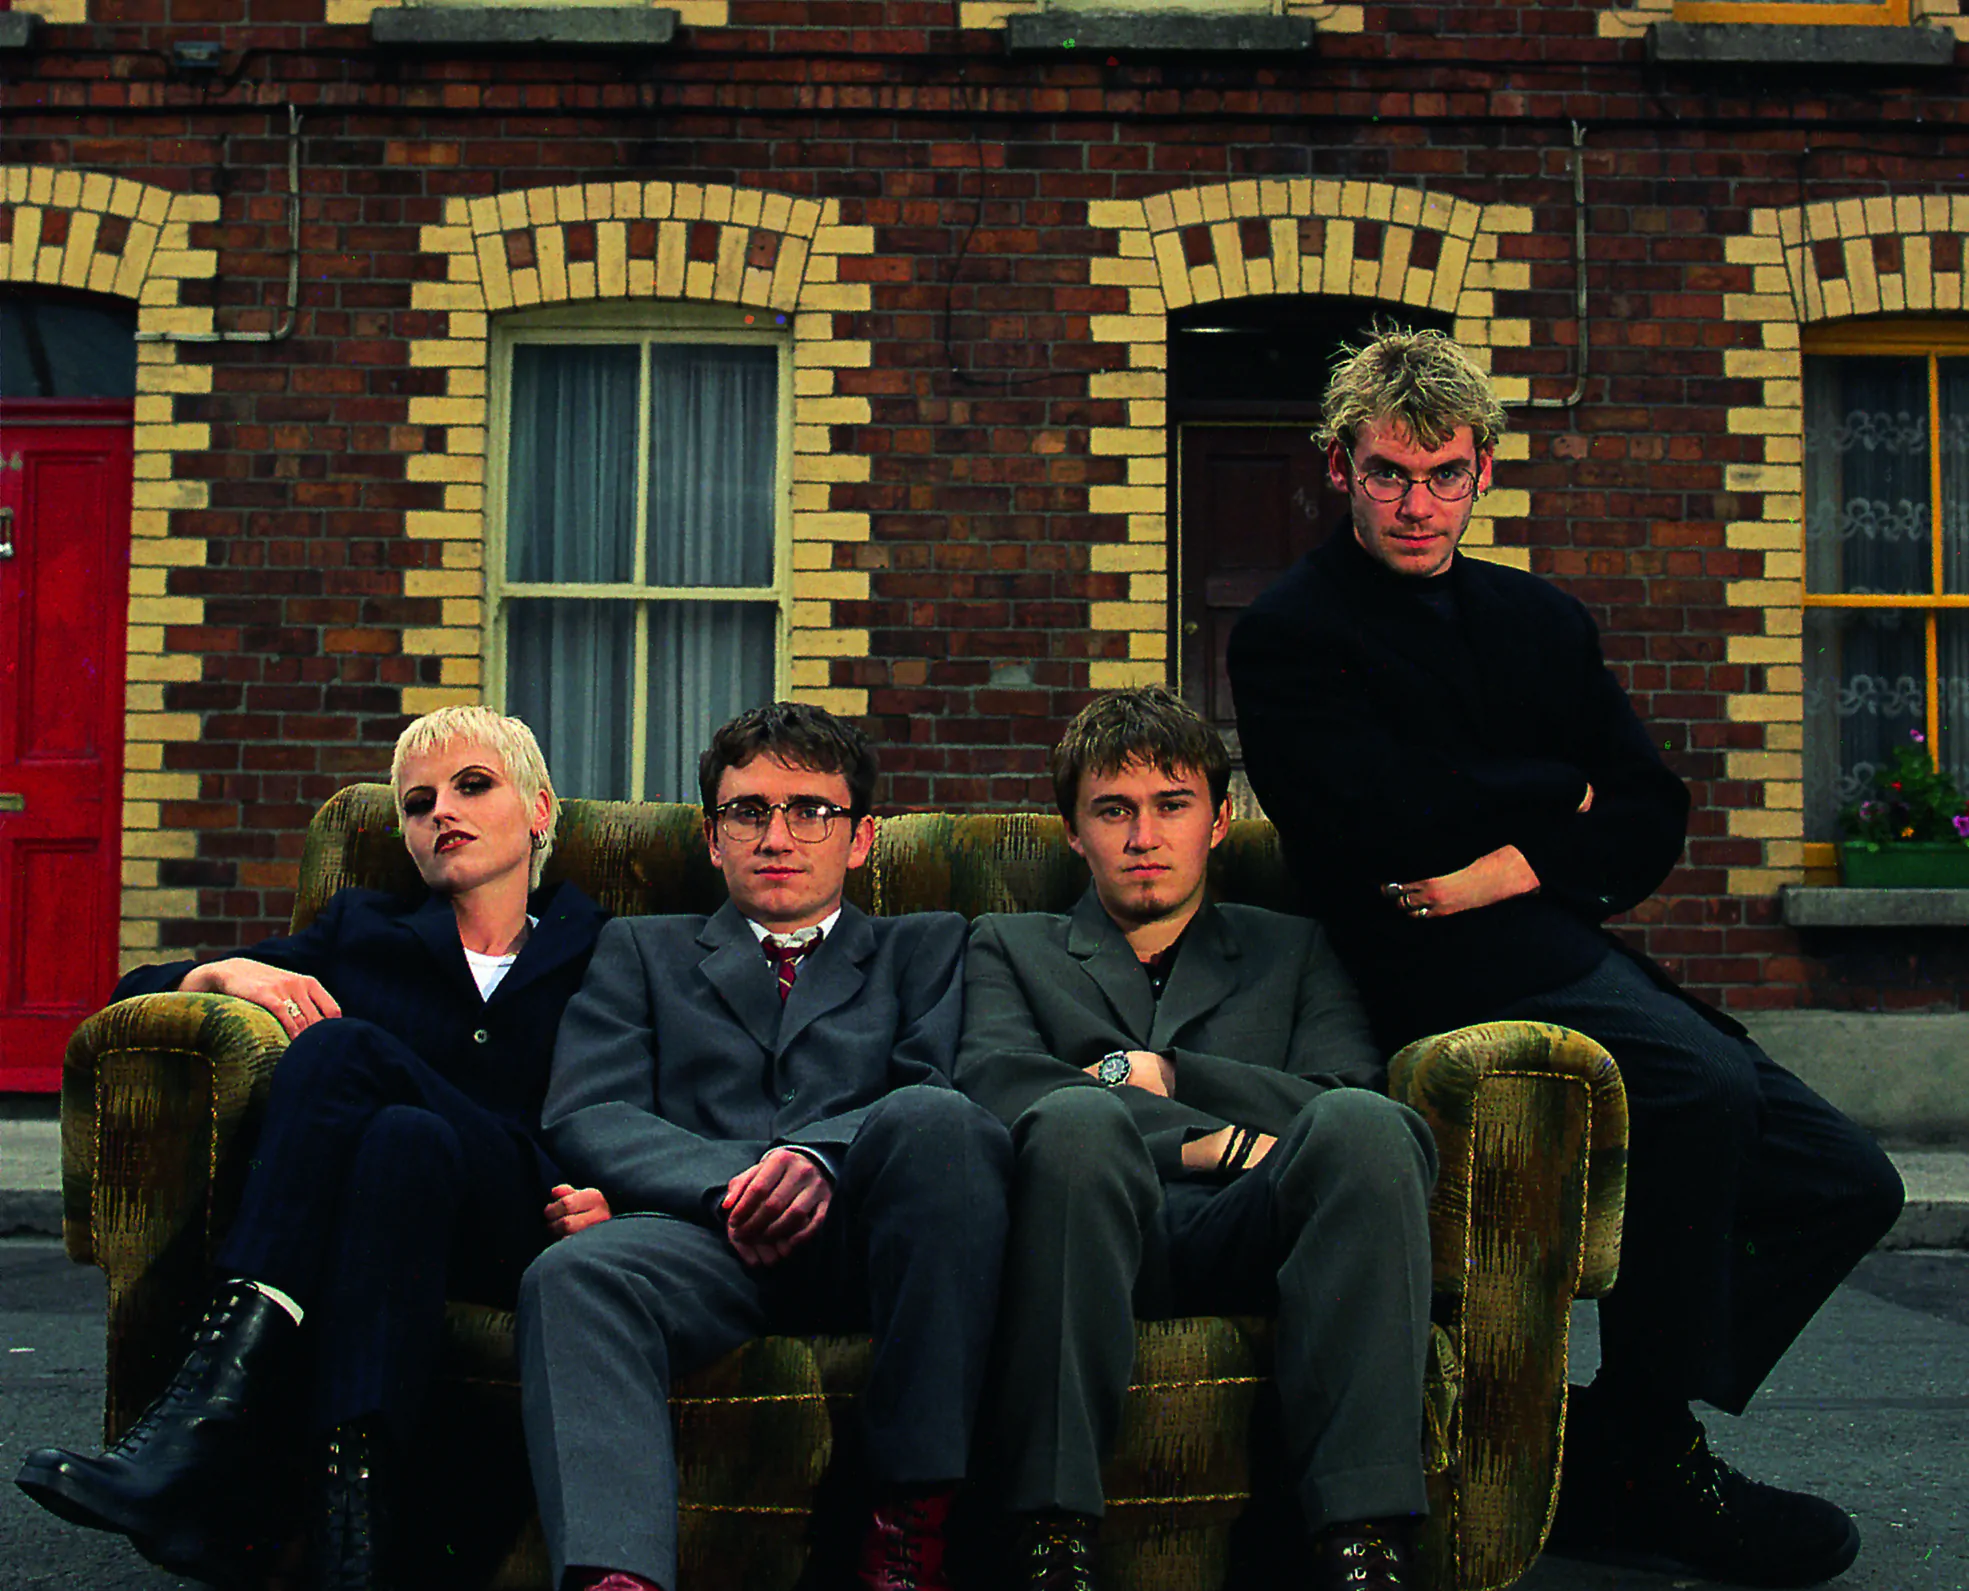 THE CRANBERRIES release ‘No Need To Argue’ remastered & expanded – out September 18th